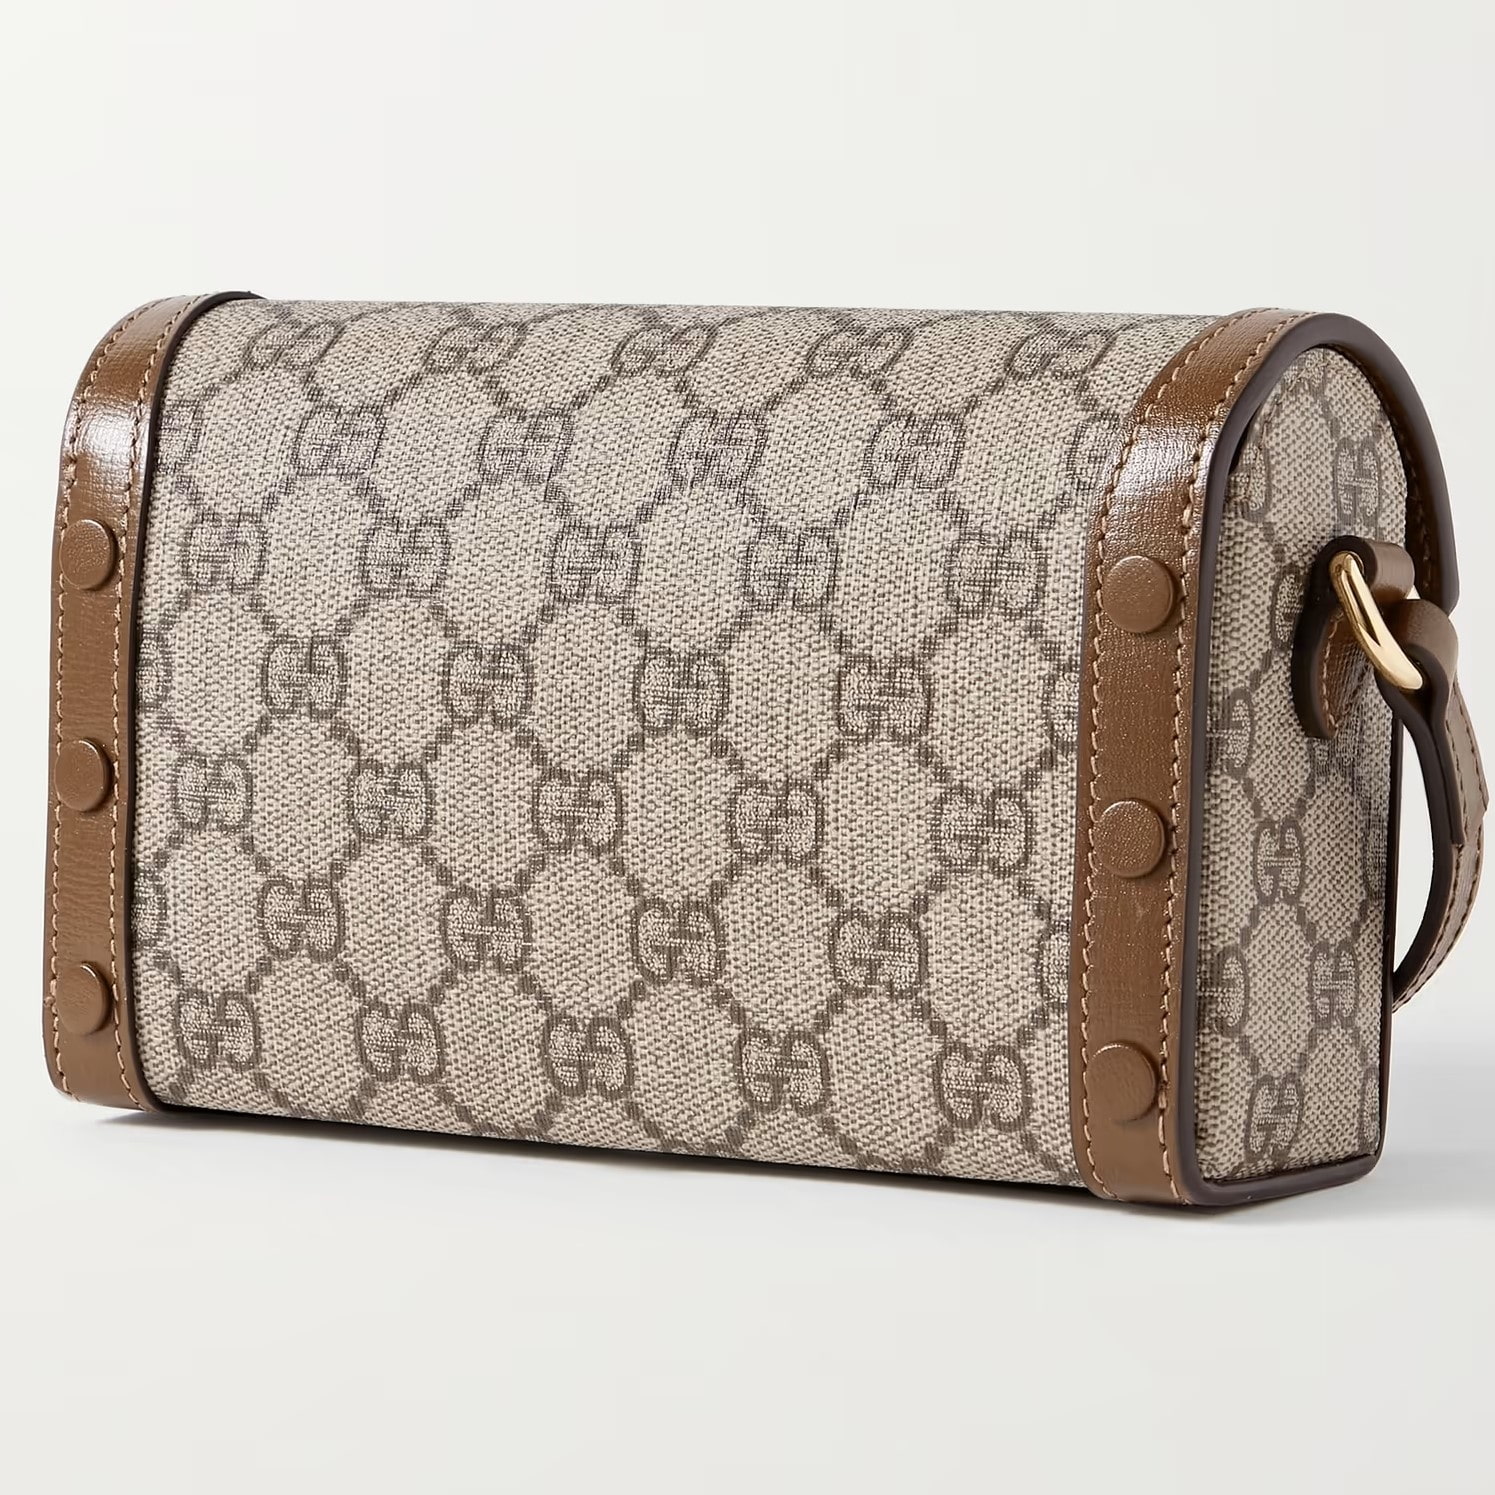 TÚI ĐEO CHÉO NỮ GUCCI HORSEBIT 1955 BROWN LEATHER TRIMMED PRINTED COATED CANVAS SHOULDER BAG 5